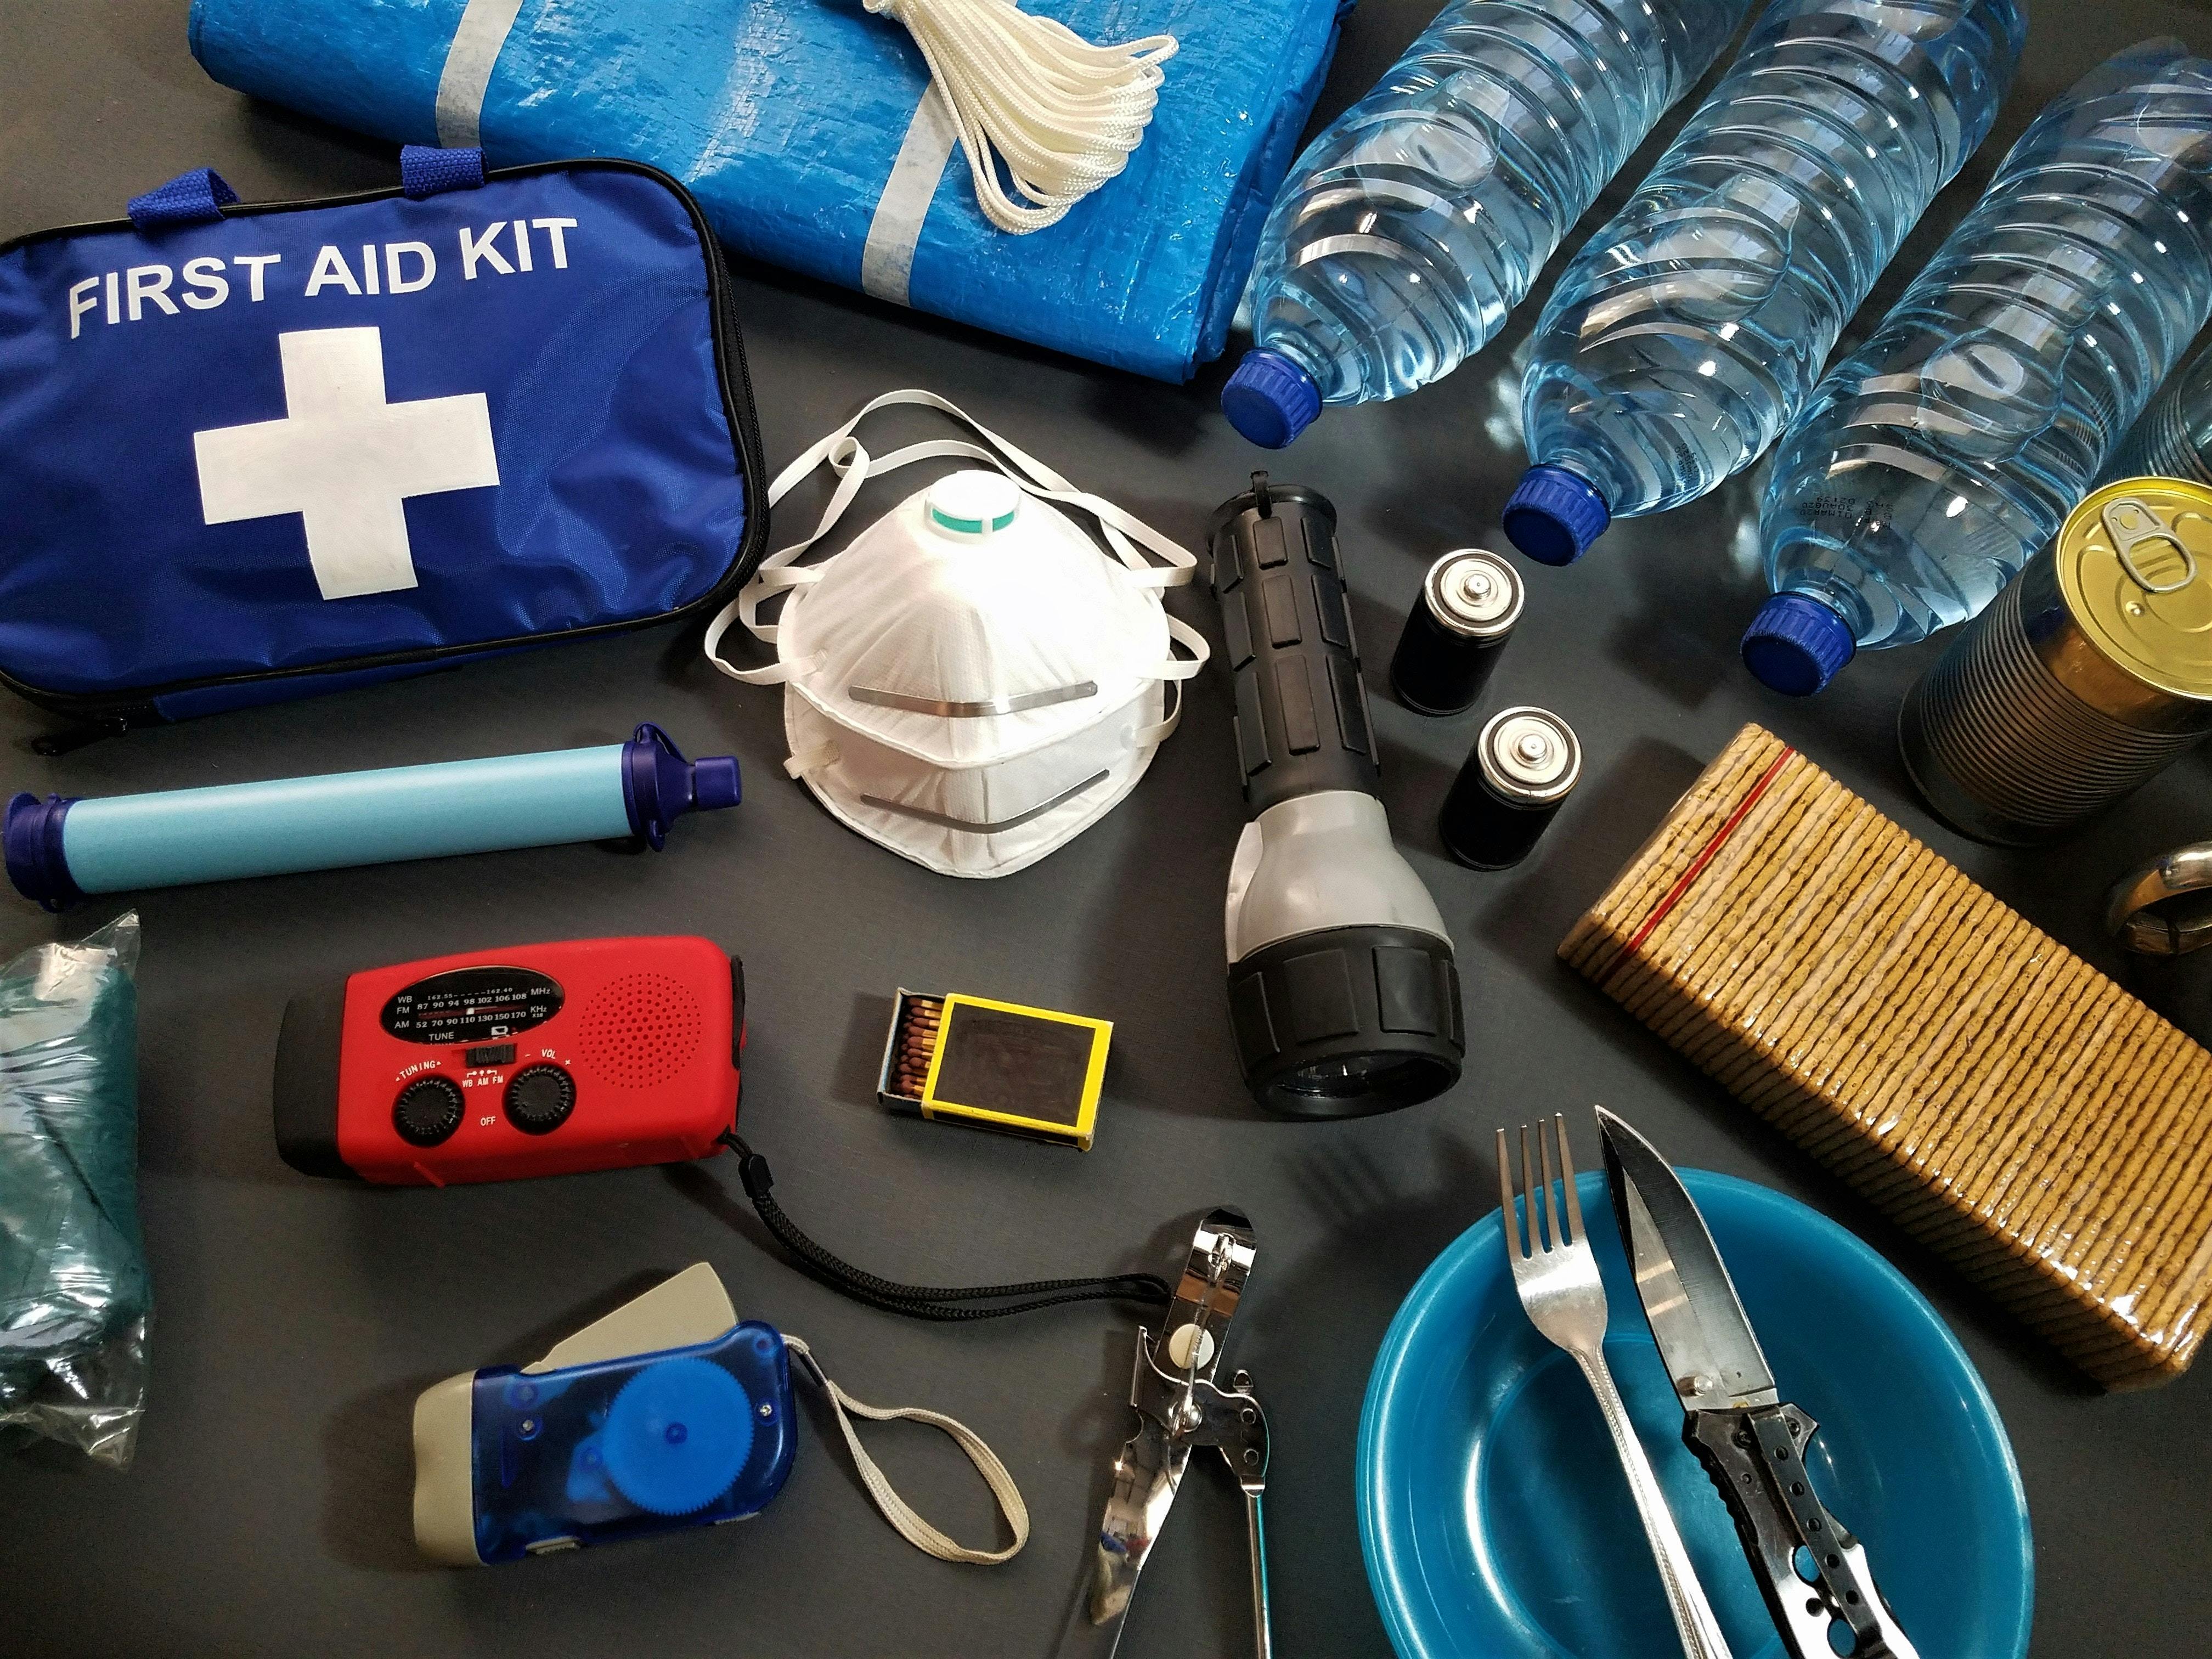 A blue first aid kit, three water bottles, a mask, crackers, utensils, a box of matches, a flashlight, two batteries, and other gear